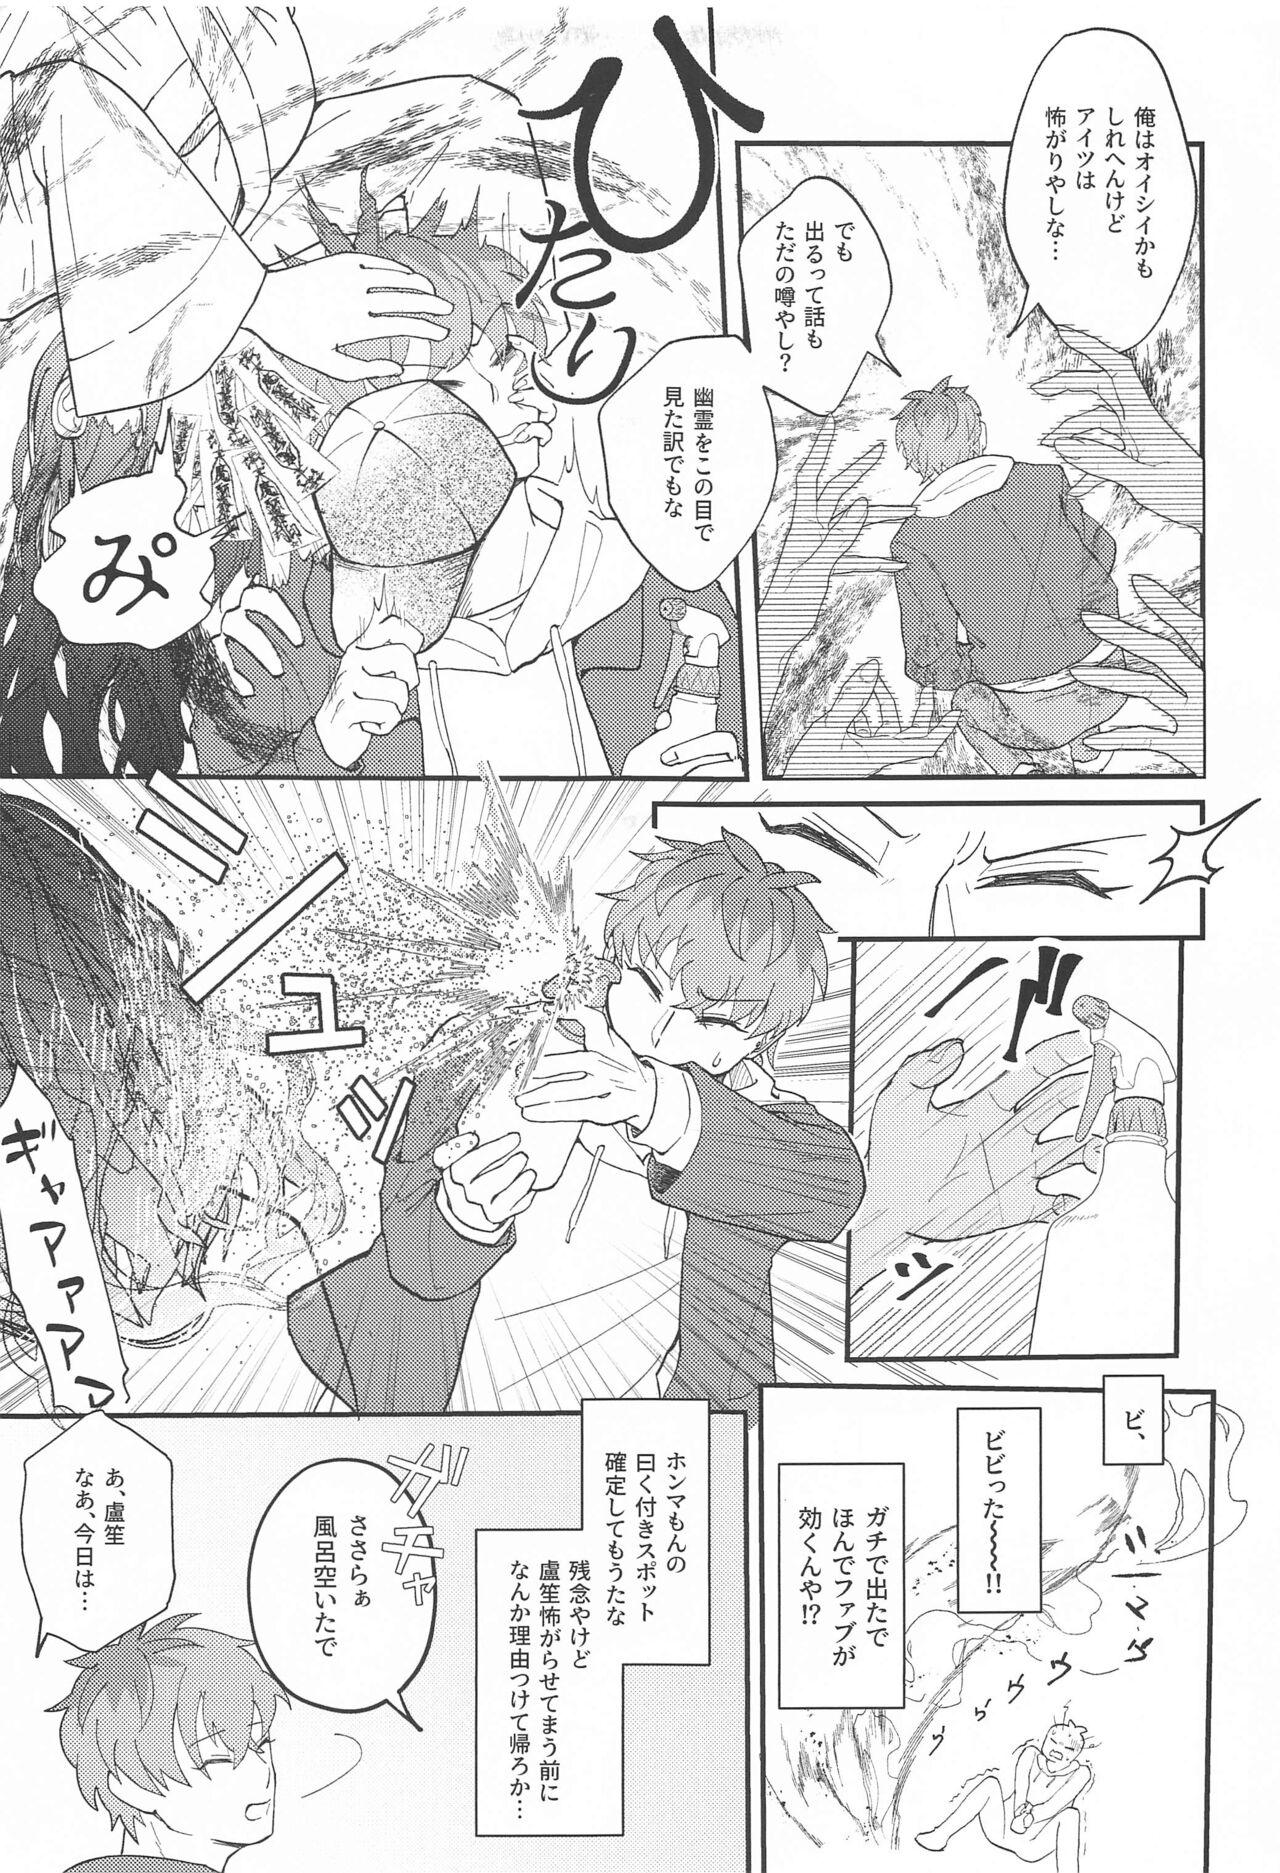 Porn Amateur Ghost in Love Palace - Hypnosis mic Amatures Gone Wild - Page 8